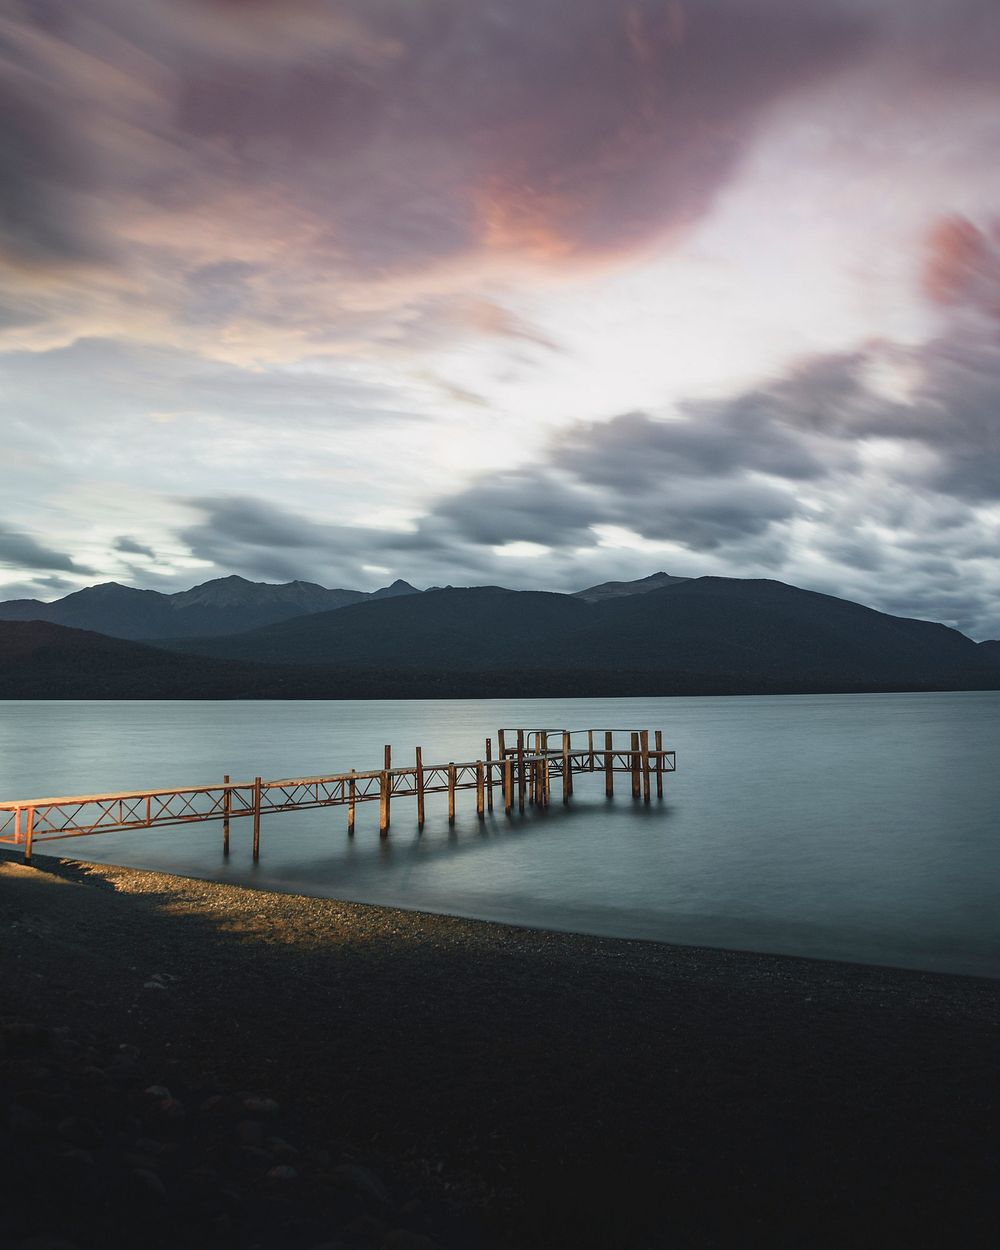 Sunset at the Te Anau pier in New Zealand